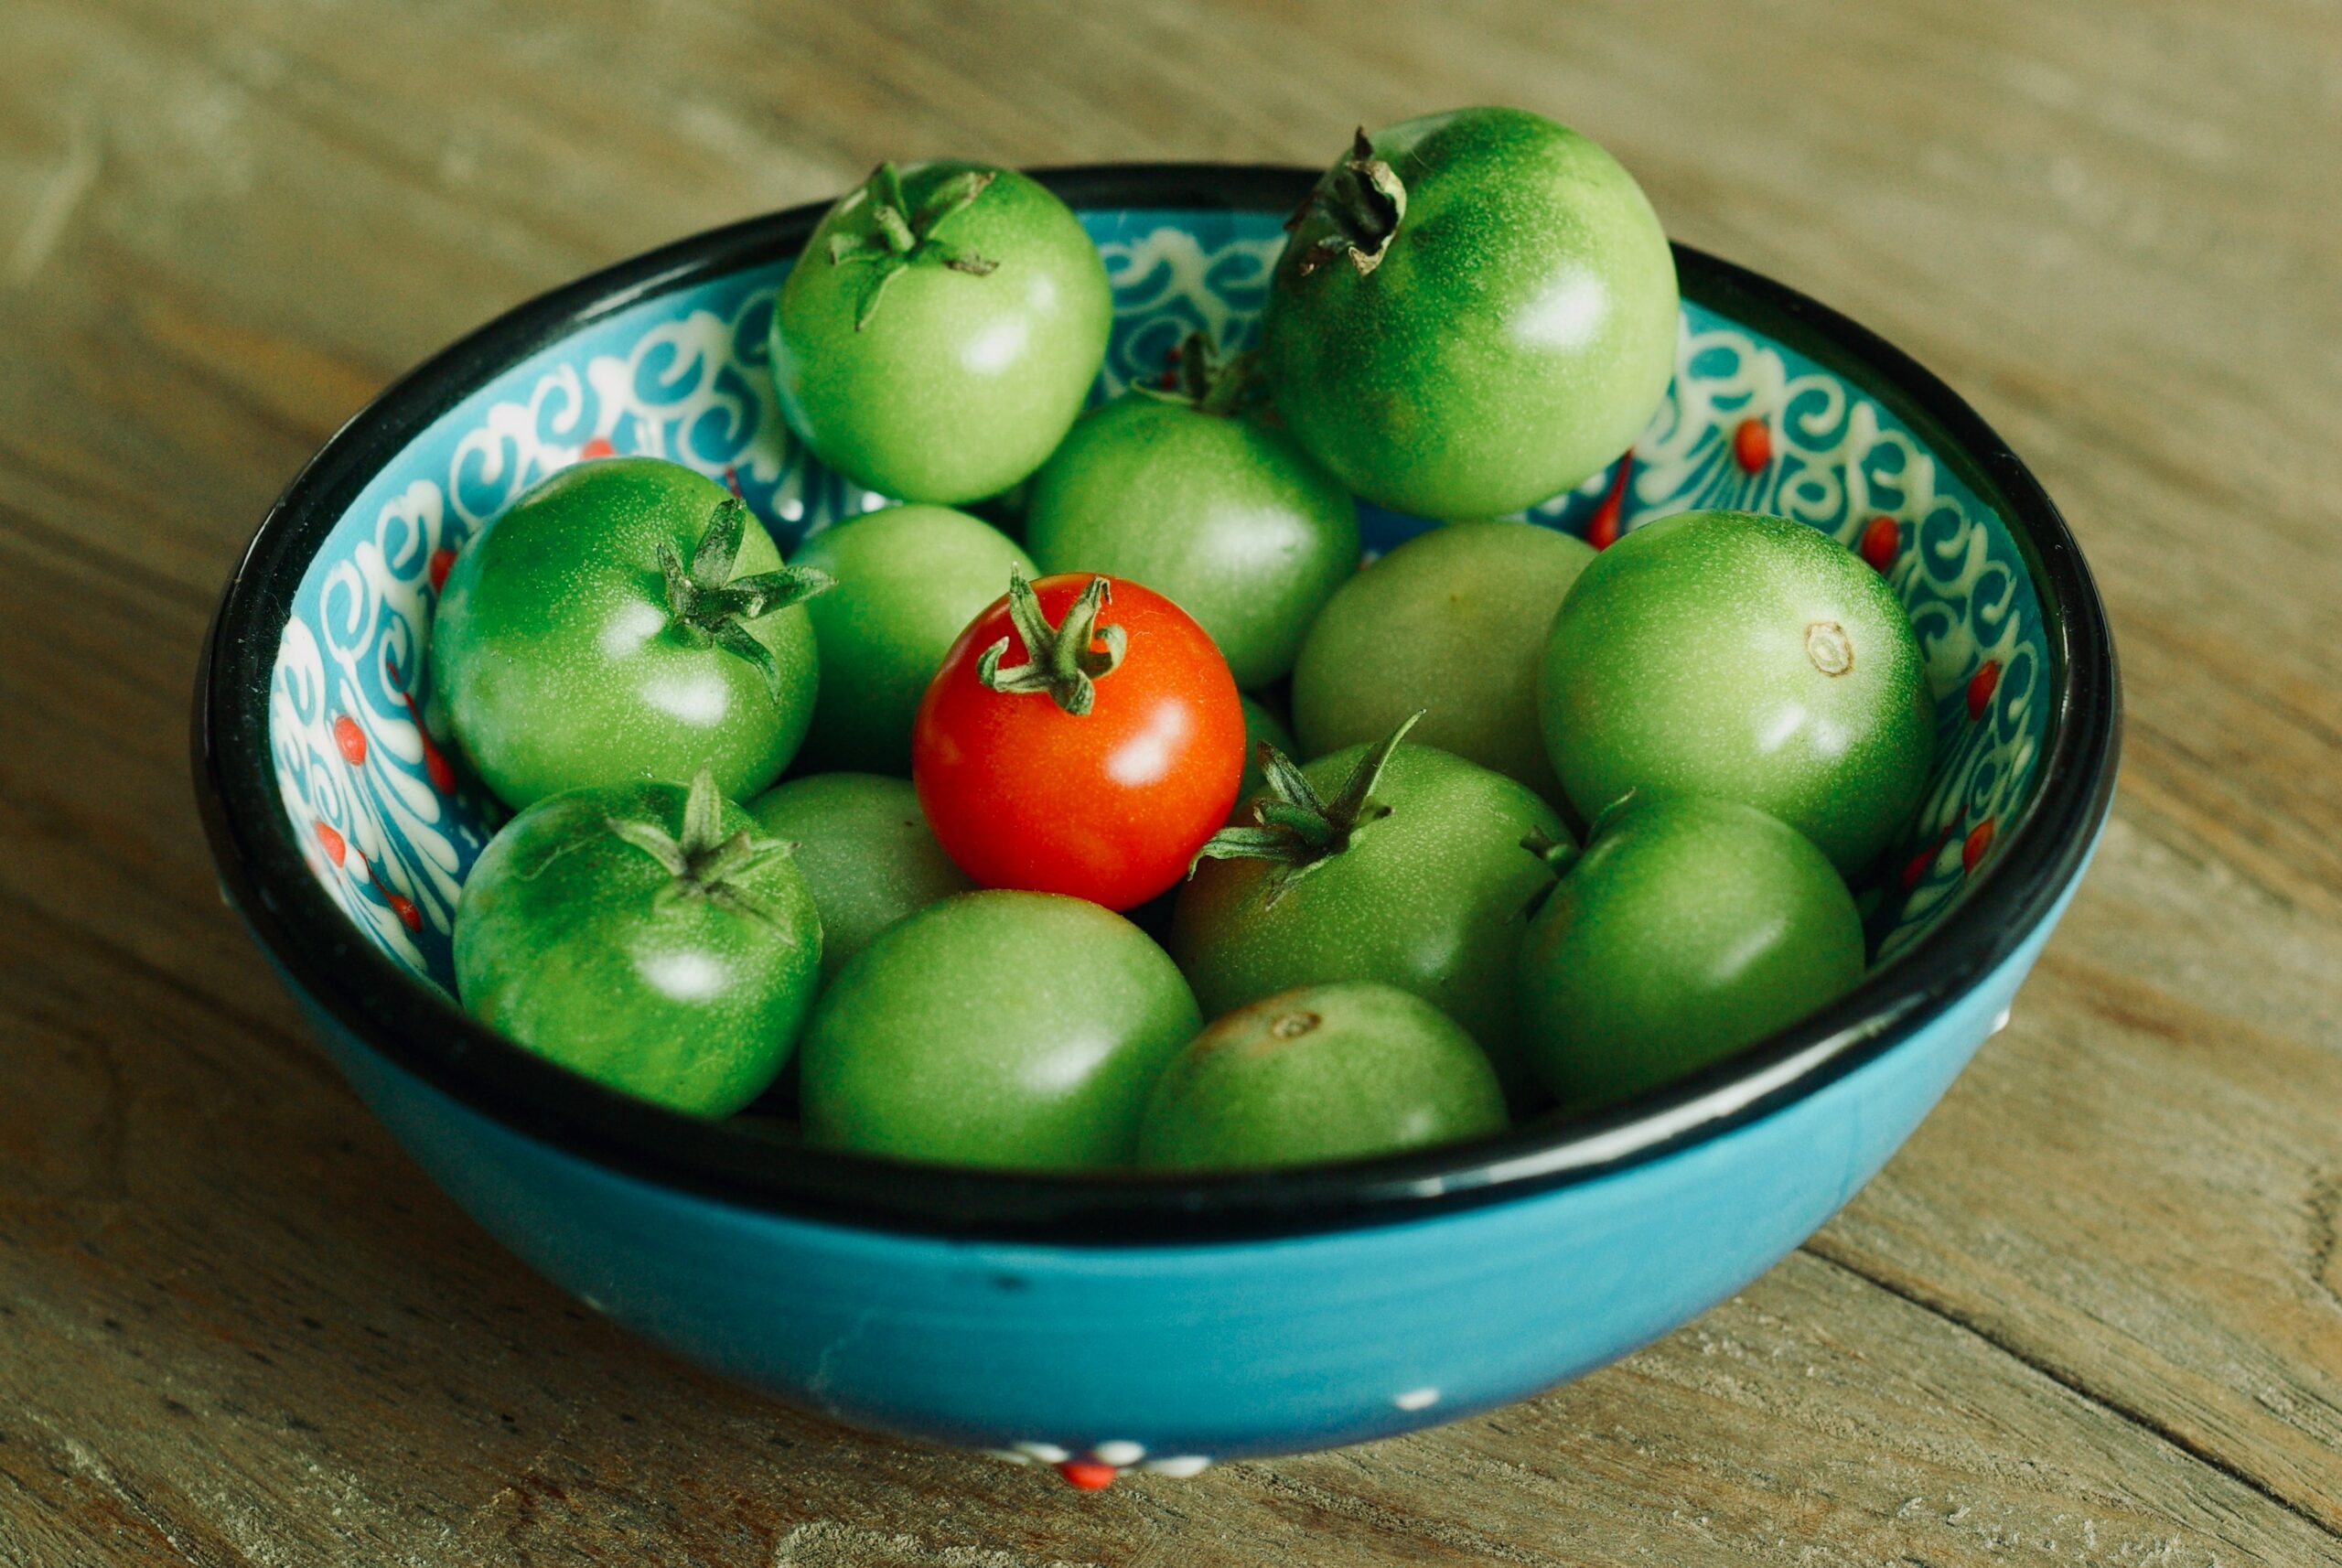 Pickled Green Tomatoes - Urban Farm and Kitchen